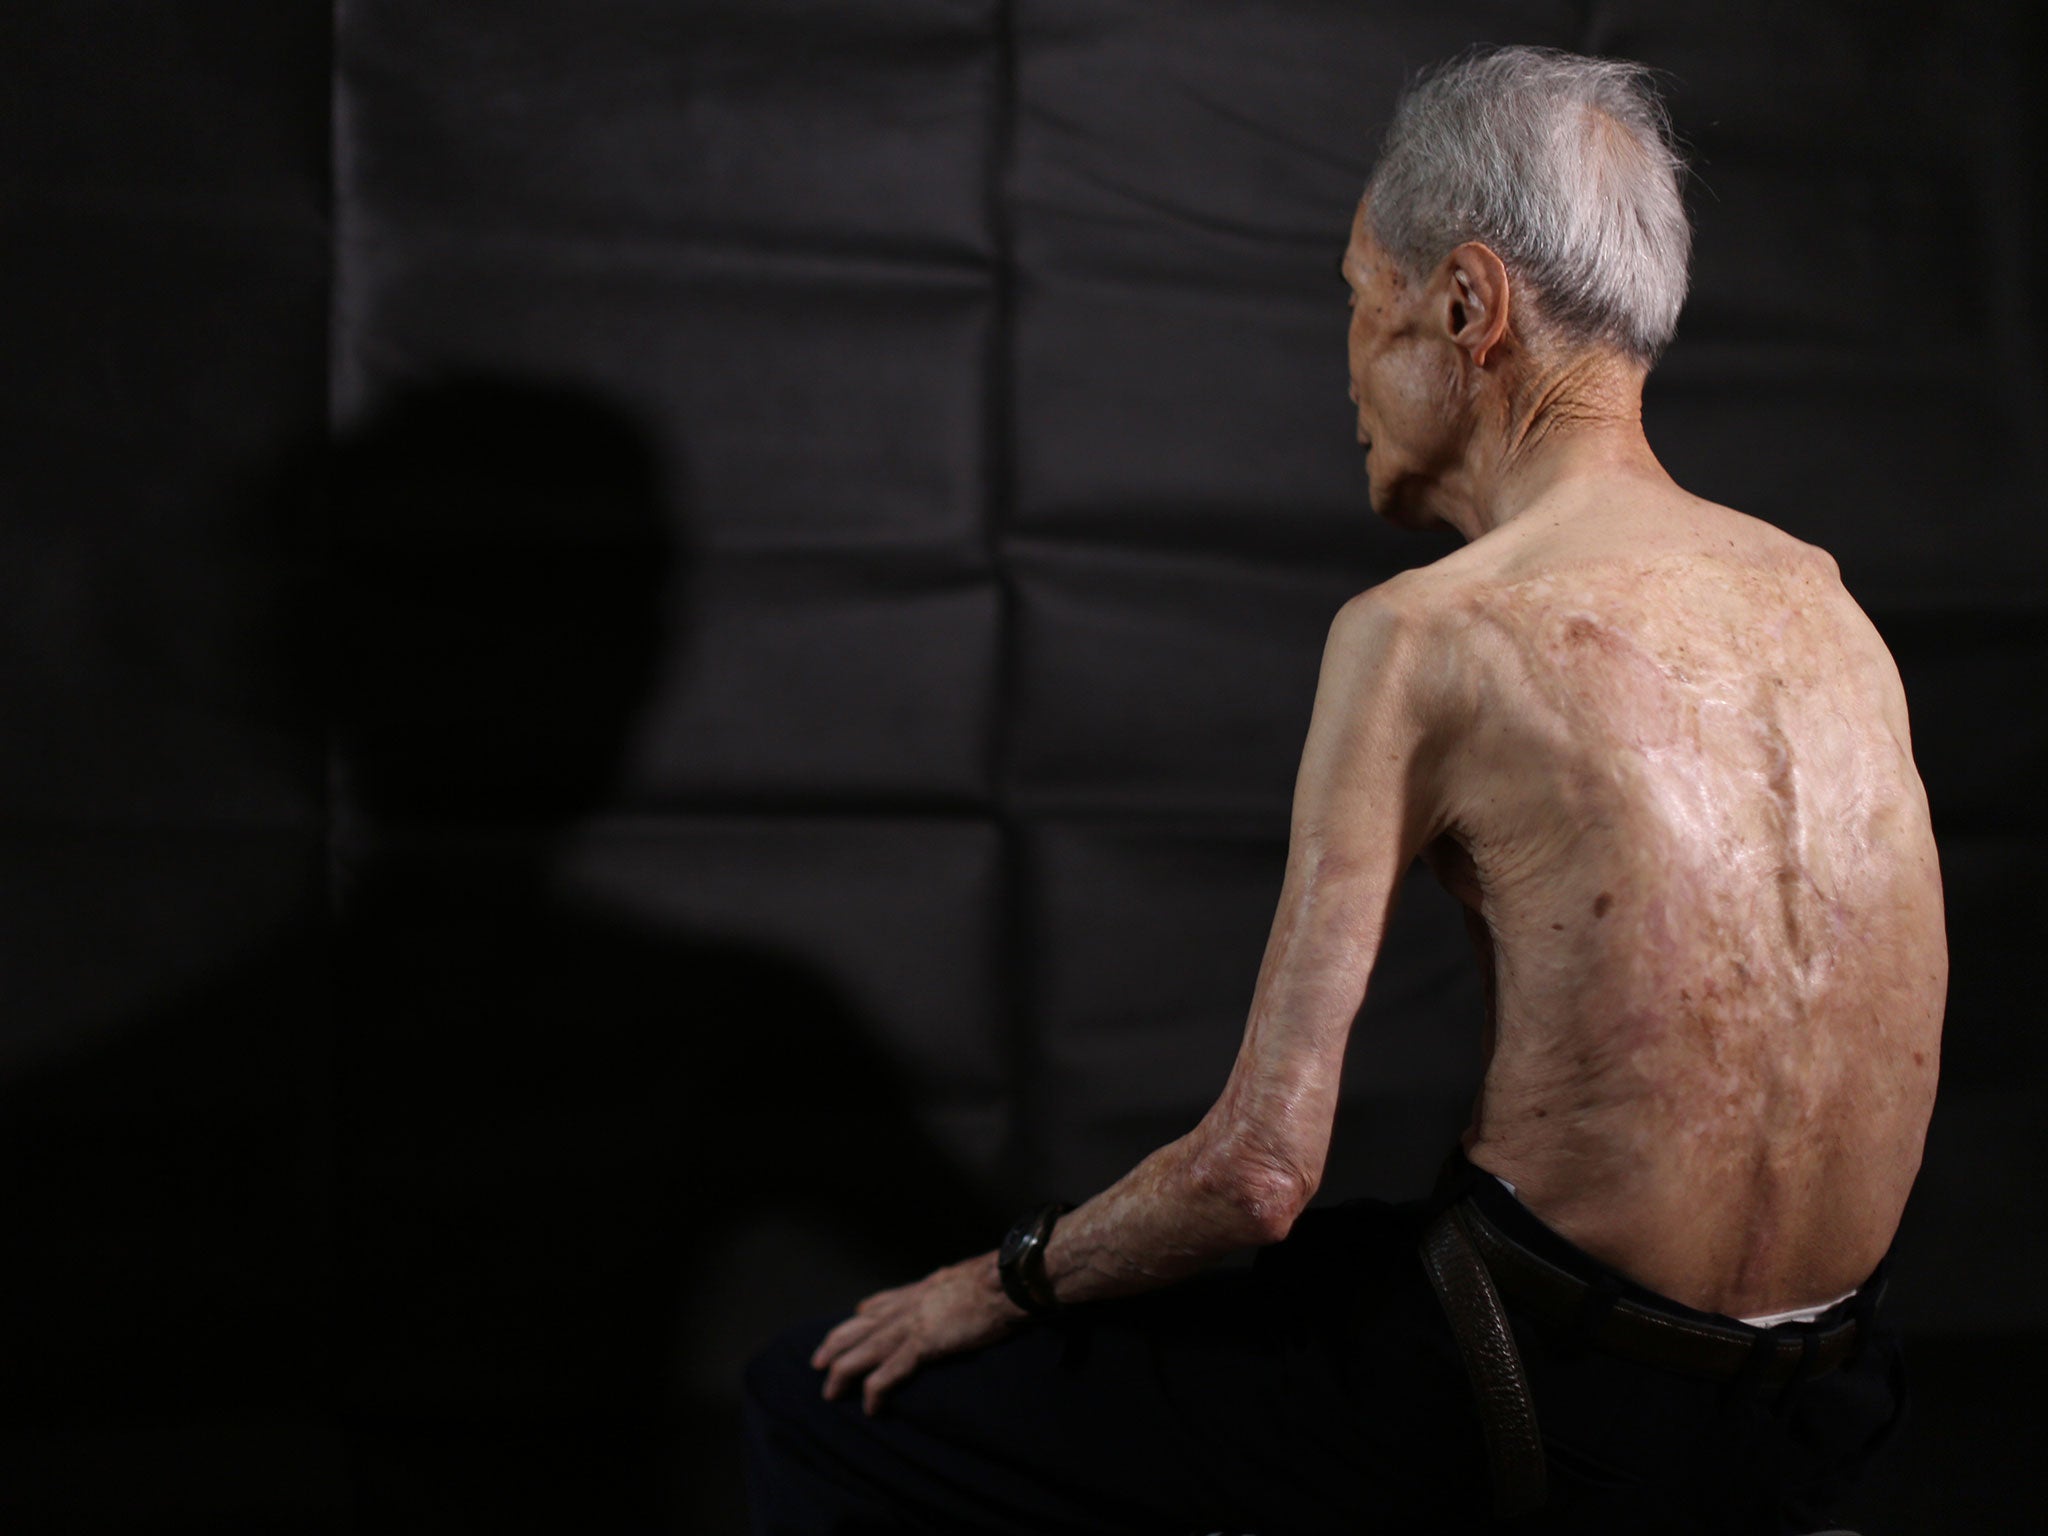 Sumiteru Taniguchi, 86, a survivor of the 1945 atomic bombing of Nagasaki, shows his back with scars of burns from the atomic bomb explosion